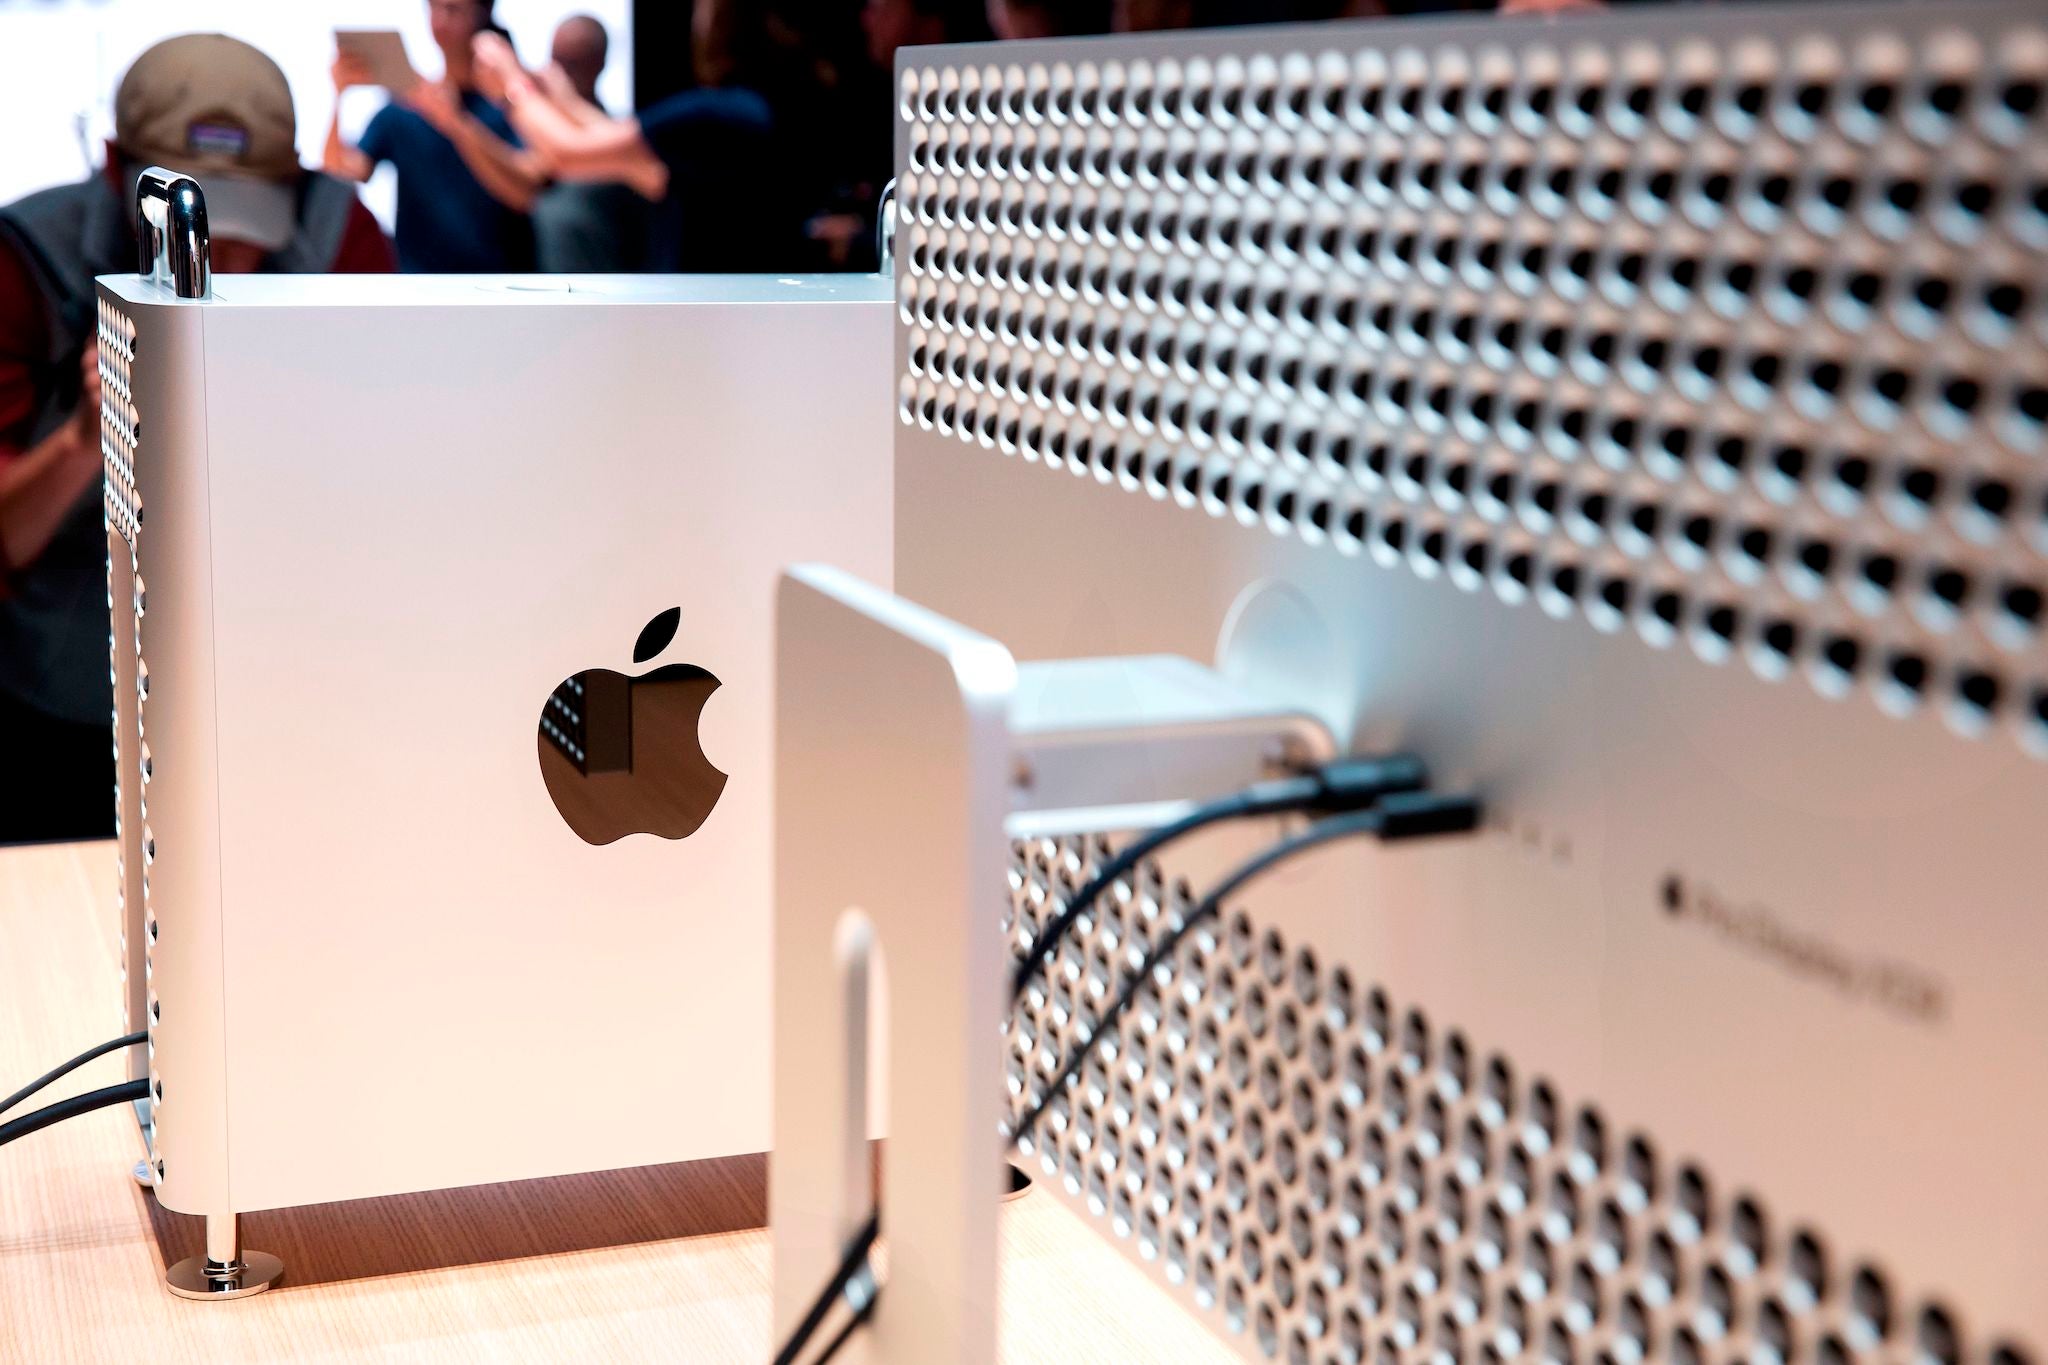 Apple's new Mac Pro sits on display in the showroom during Apple's Worldwide Developer Conference